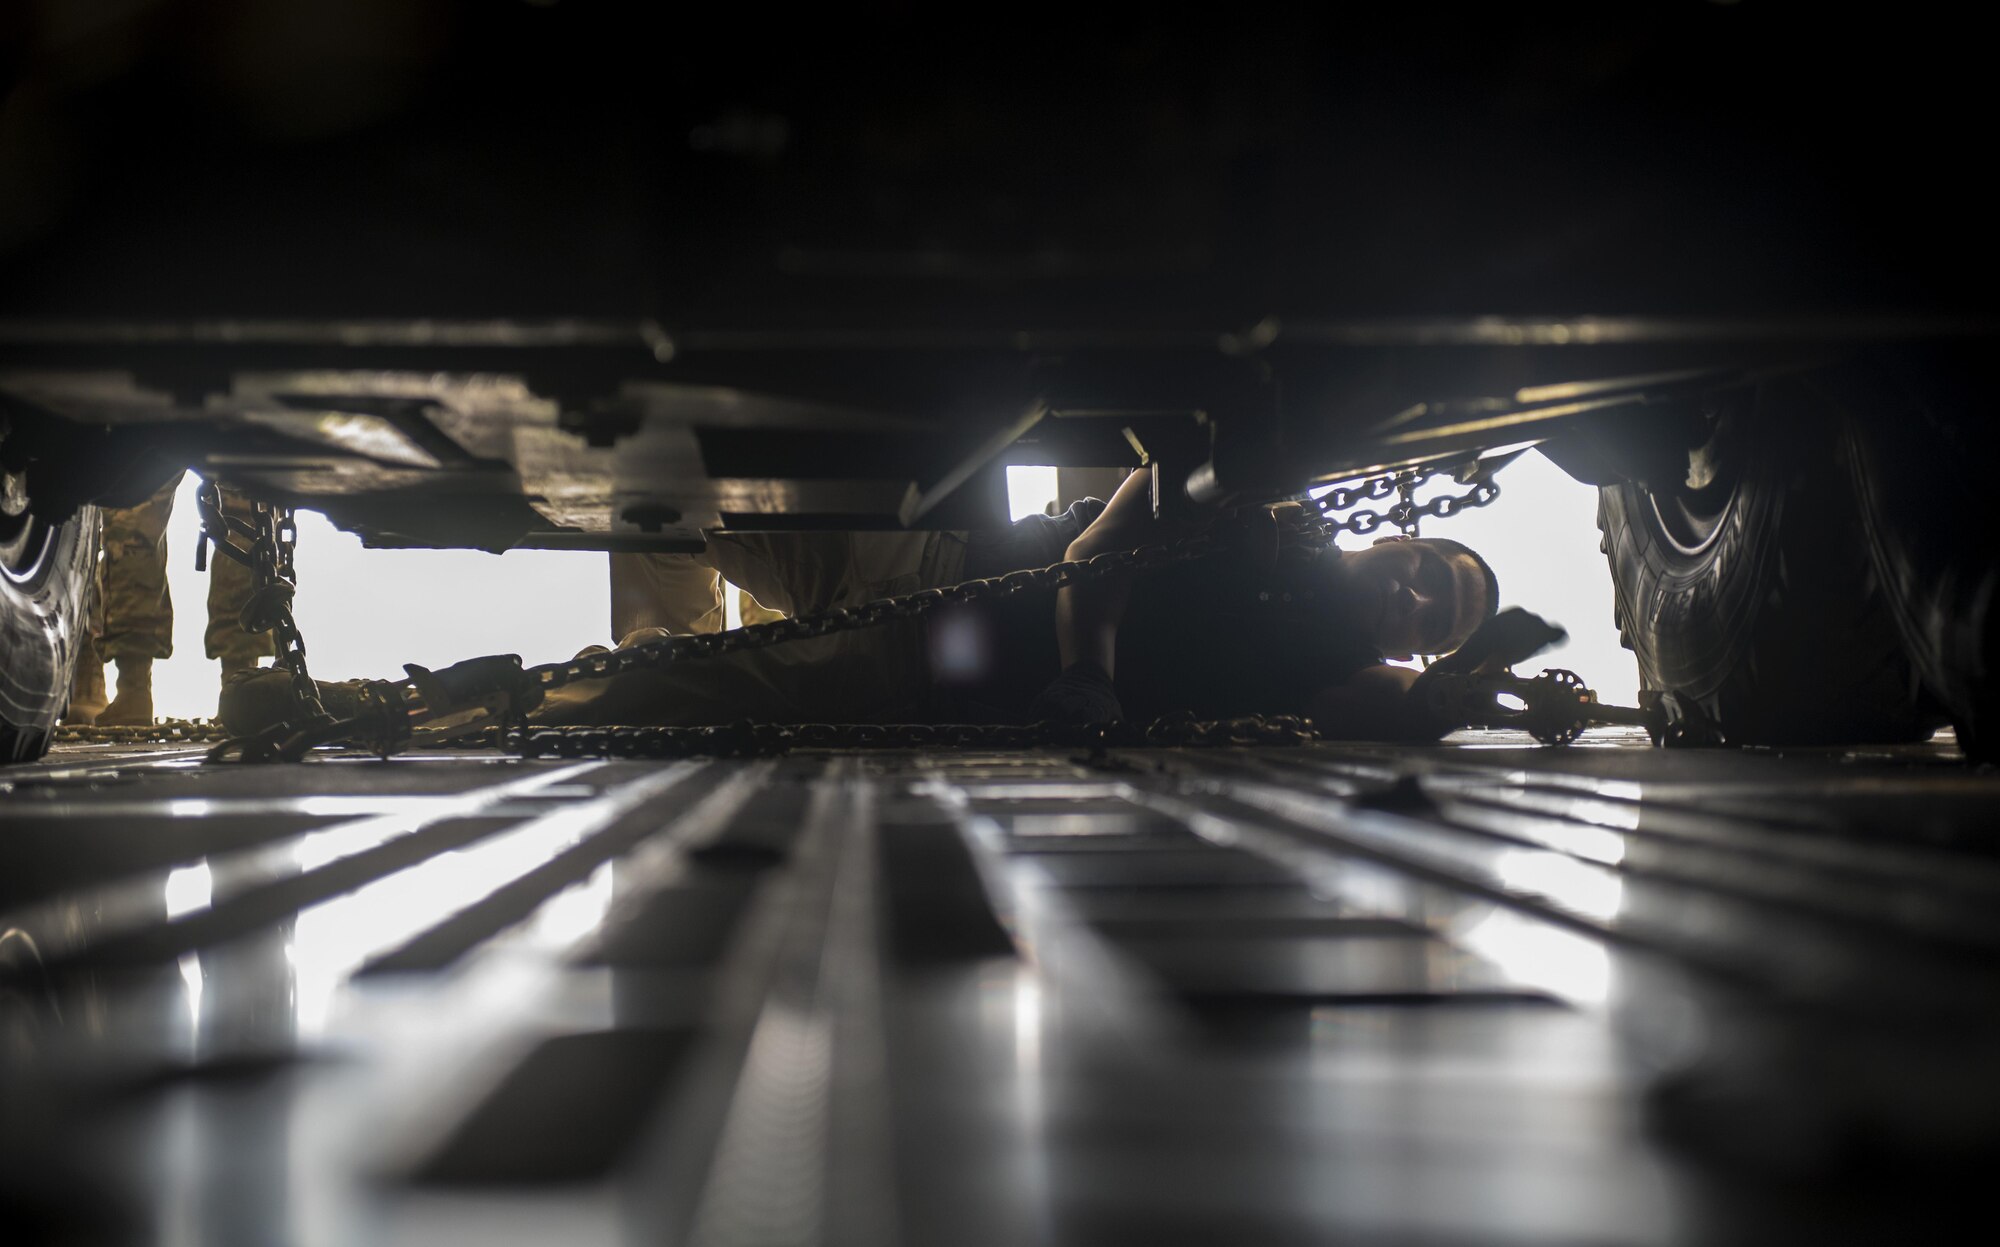 U.S. Air Force Senior Airman Tomas Cubilla, 435th Contingency Response Squadron mobile aerial port journeyman, hooks the underside of a U.S. Army 2nd Cavalry Regiment Interim Armored Vehicle Stryker to the floor of a U.S Air Force C-17 Globemaster III at Nuremburg Airport, Germany, July 13, 2017. U.S. Air Forces in Europe provides flexible and rapid airlift capability to the U.S. Army in support of vehicle repositioning, testing, and training.  (U.S. Air Force photo by Senior Airman Tryphena Mayhugh)